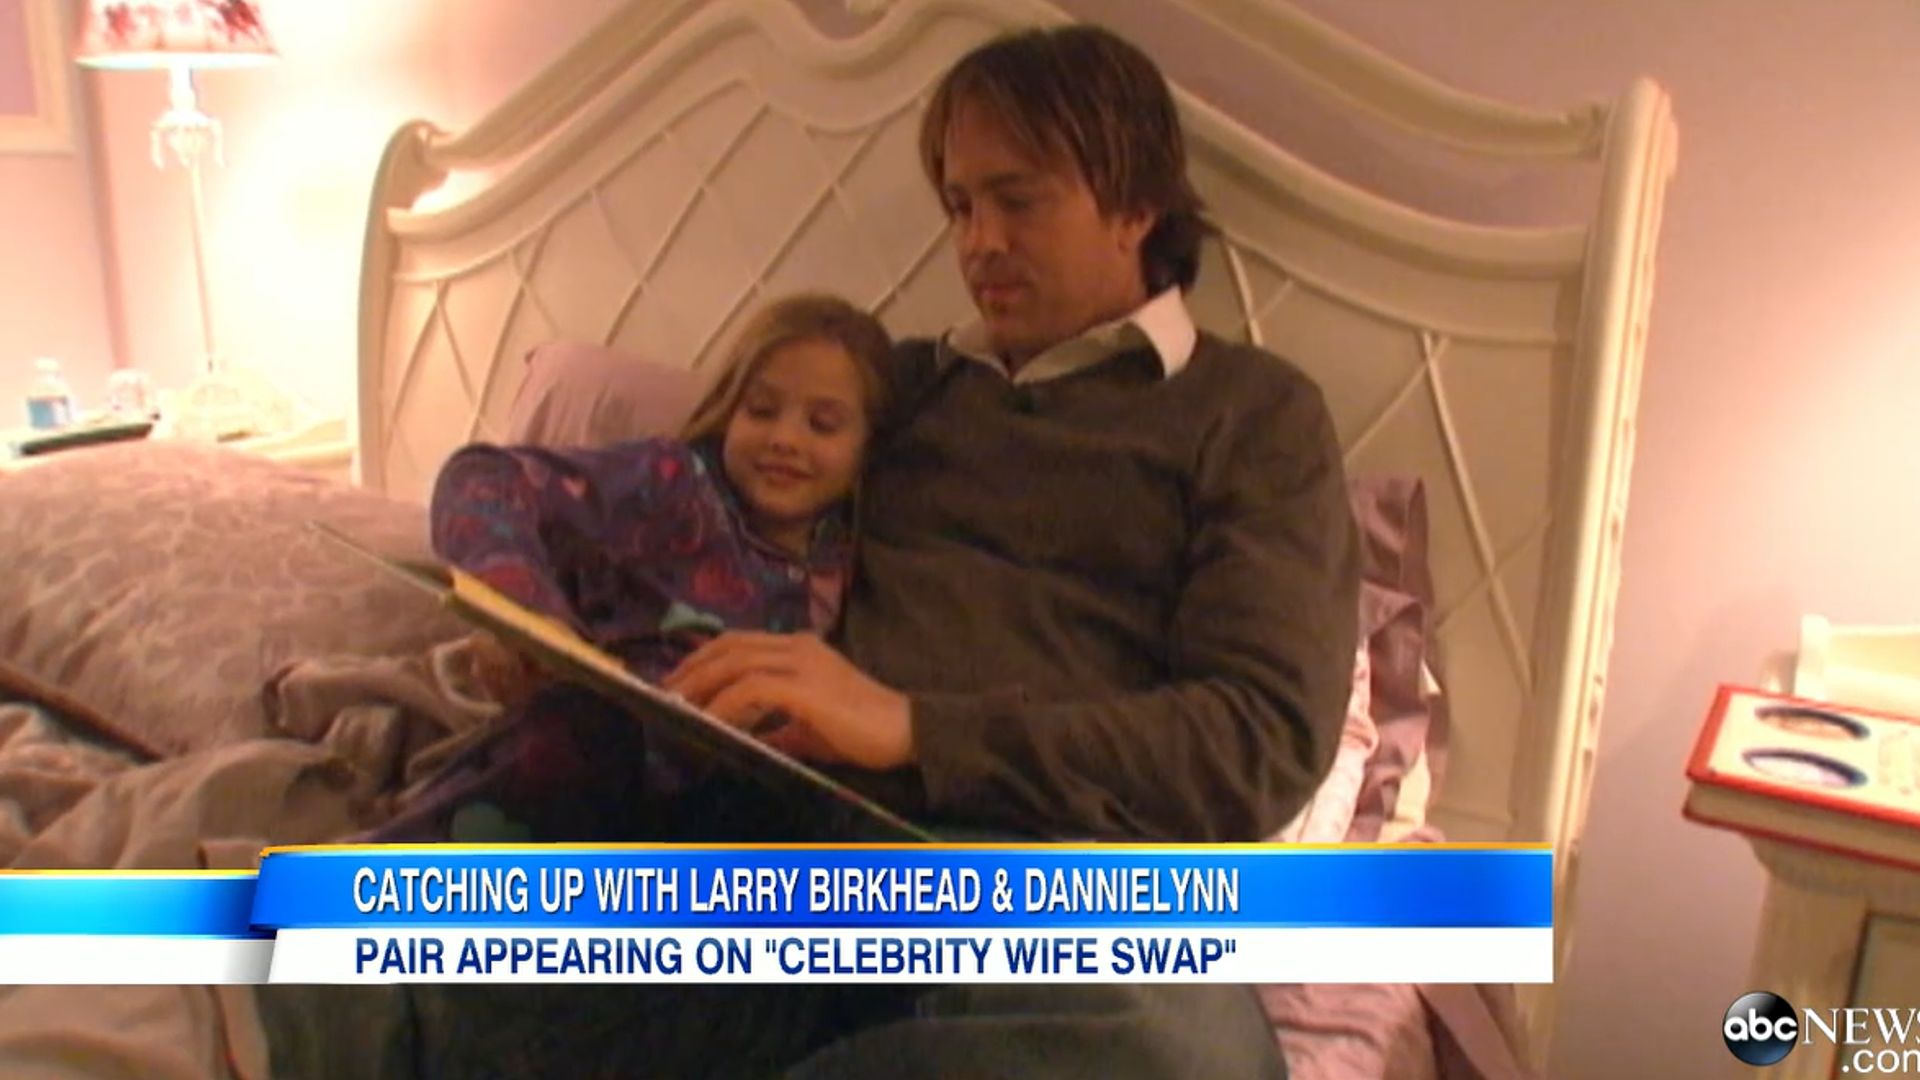 Larry and Dannielynn sat reading on her bed in her princess themed bedroom